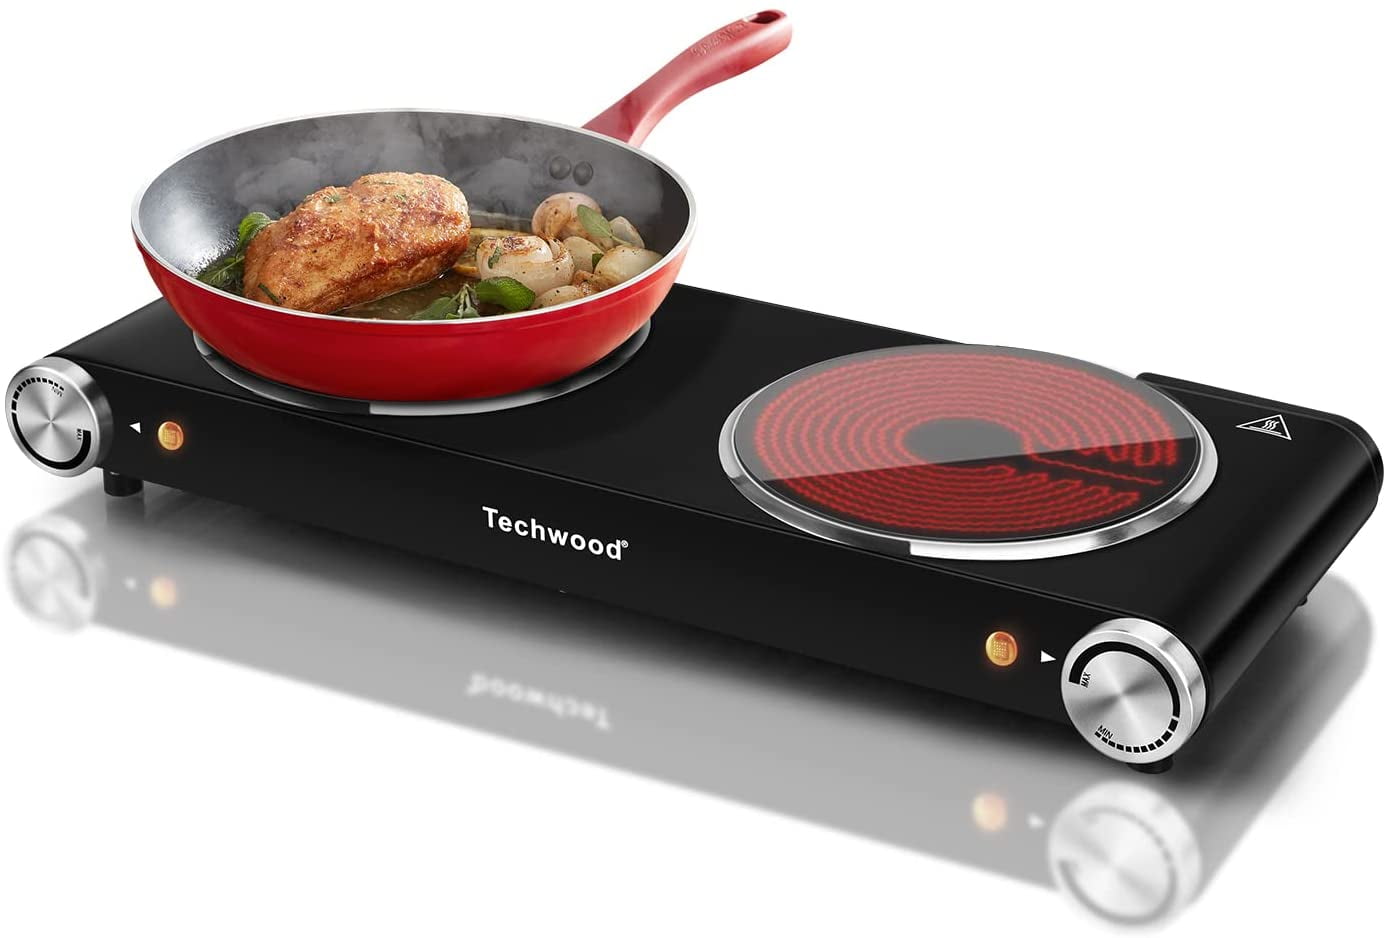 SUNAVO Hot Plates for Cooking, 1800W Electric Double Hungary